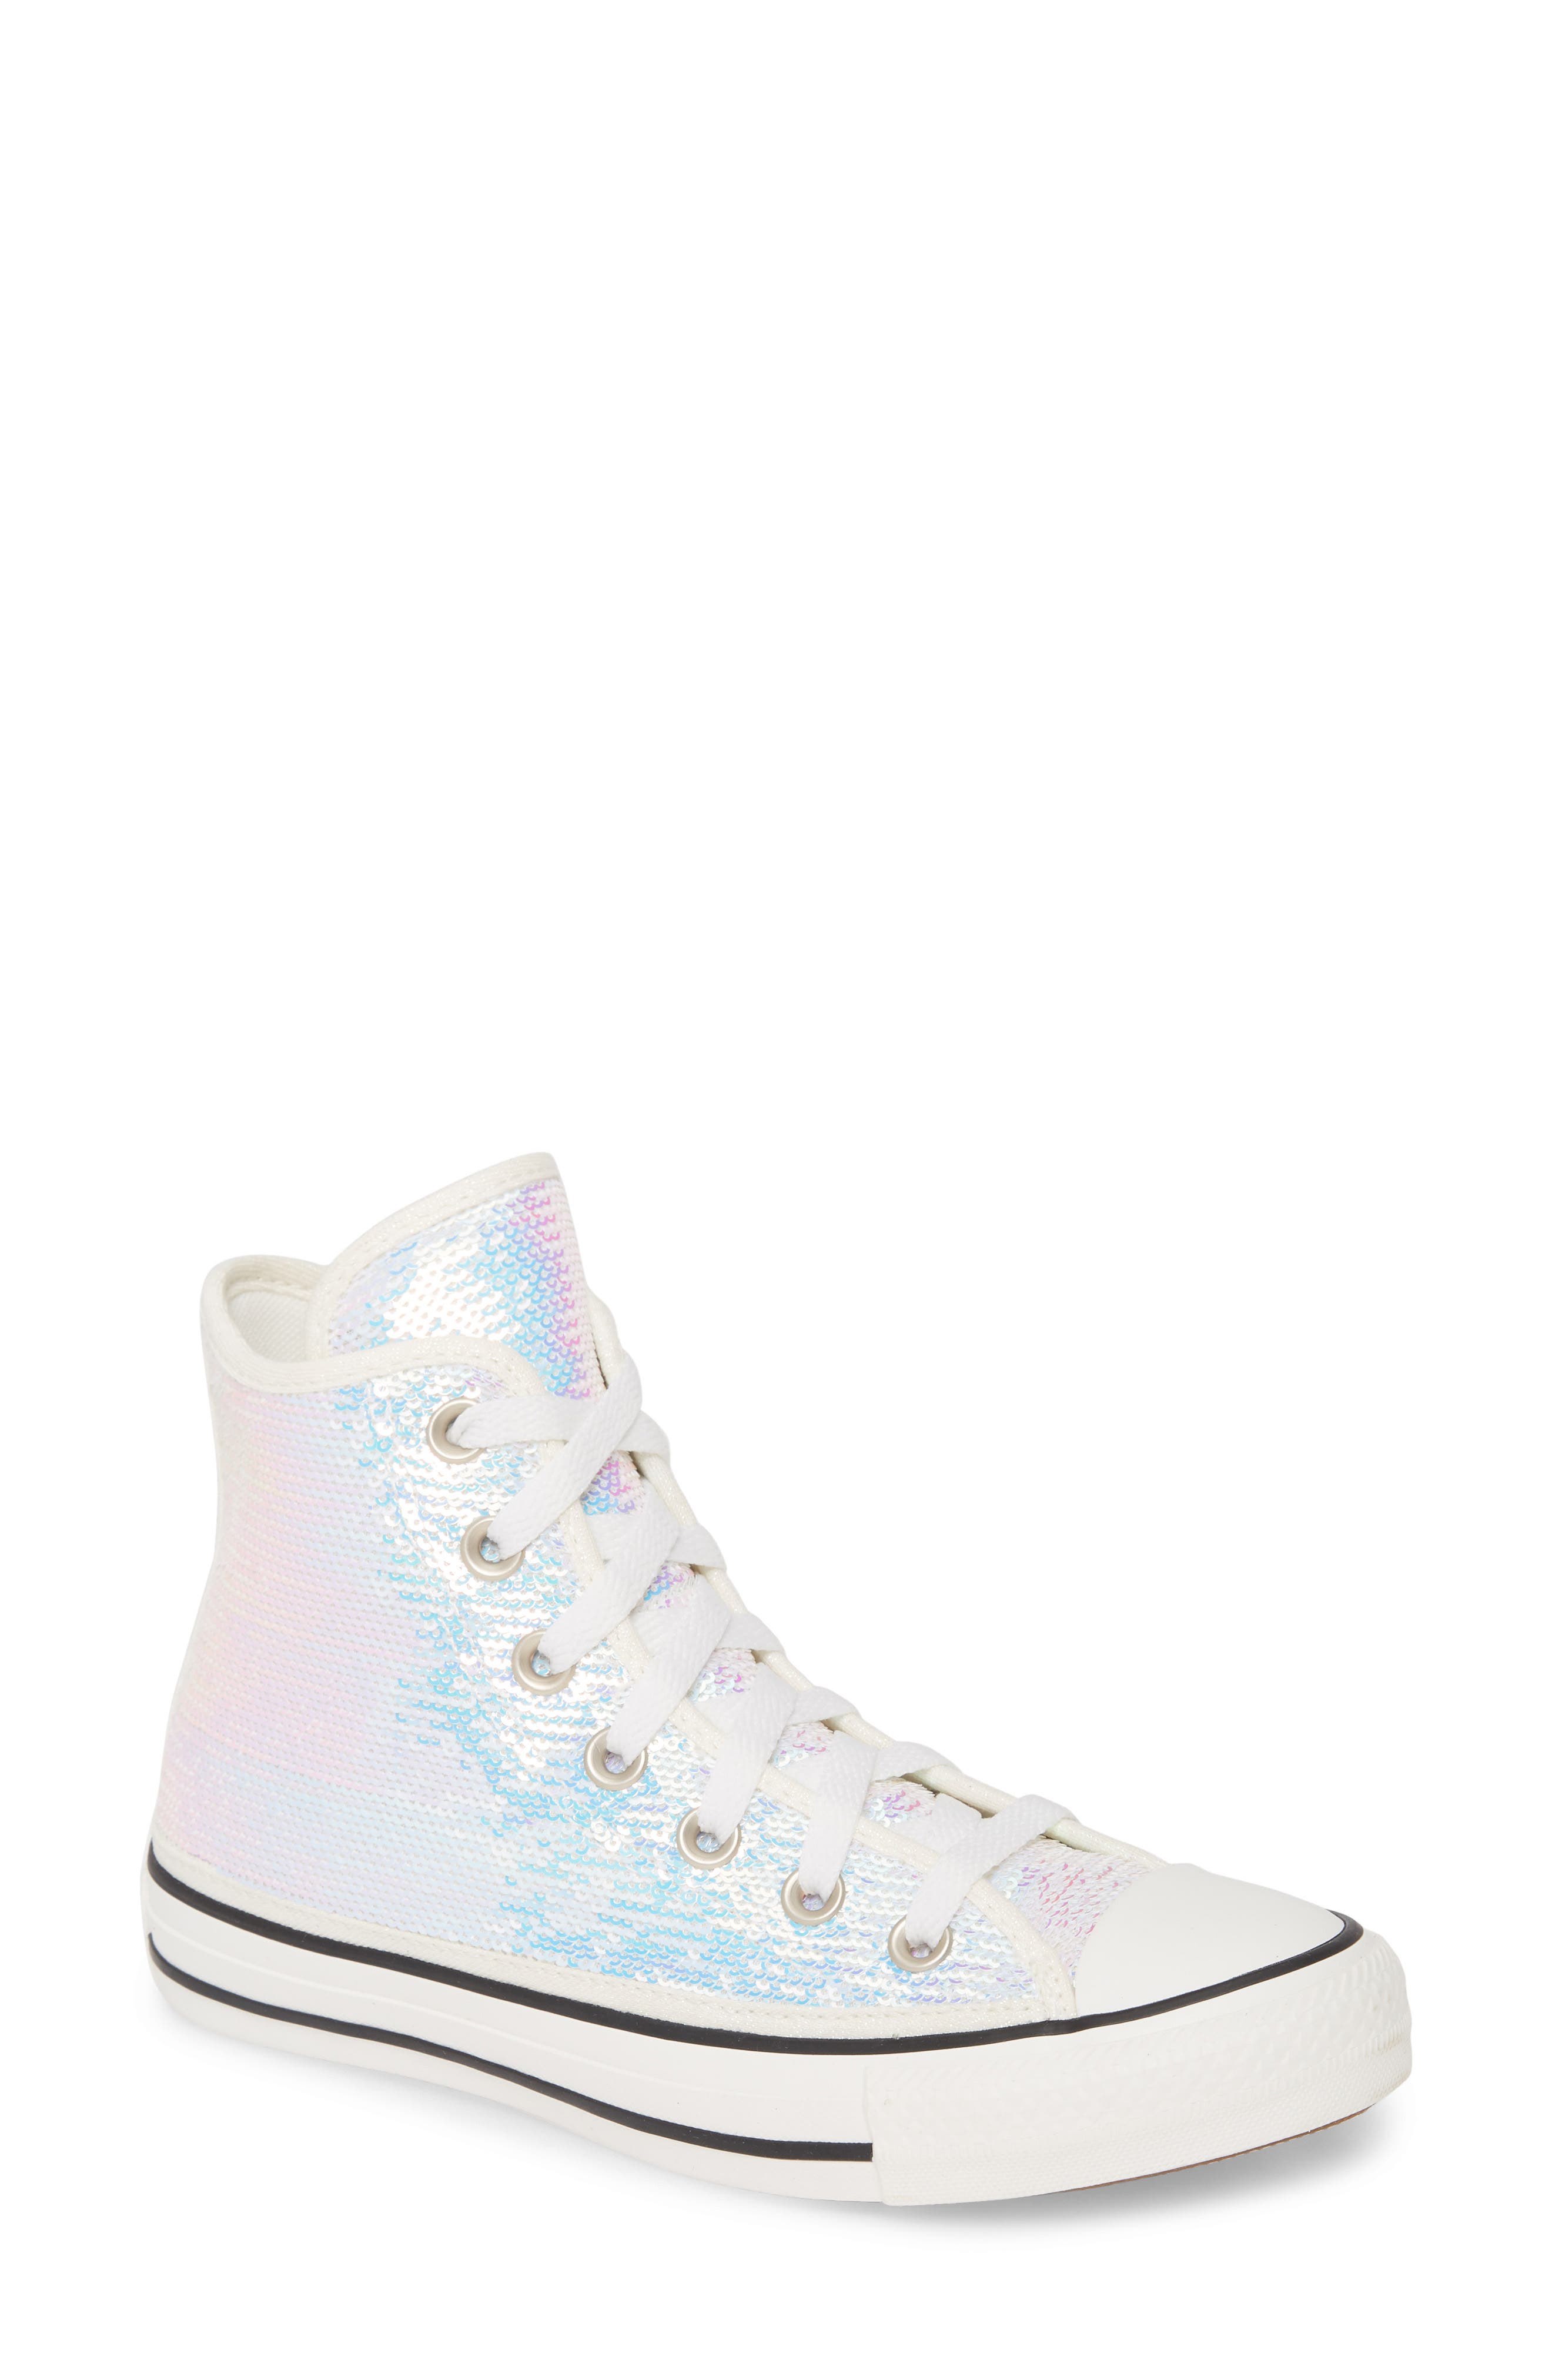 womens converse sequin sneakers